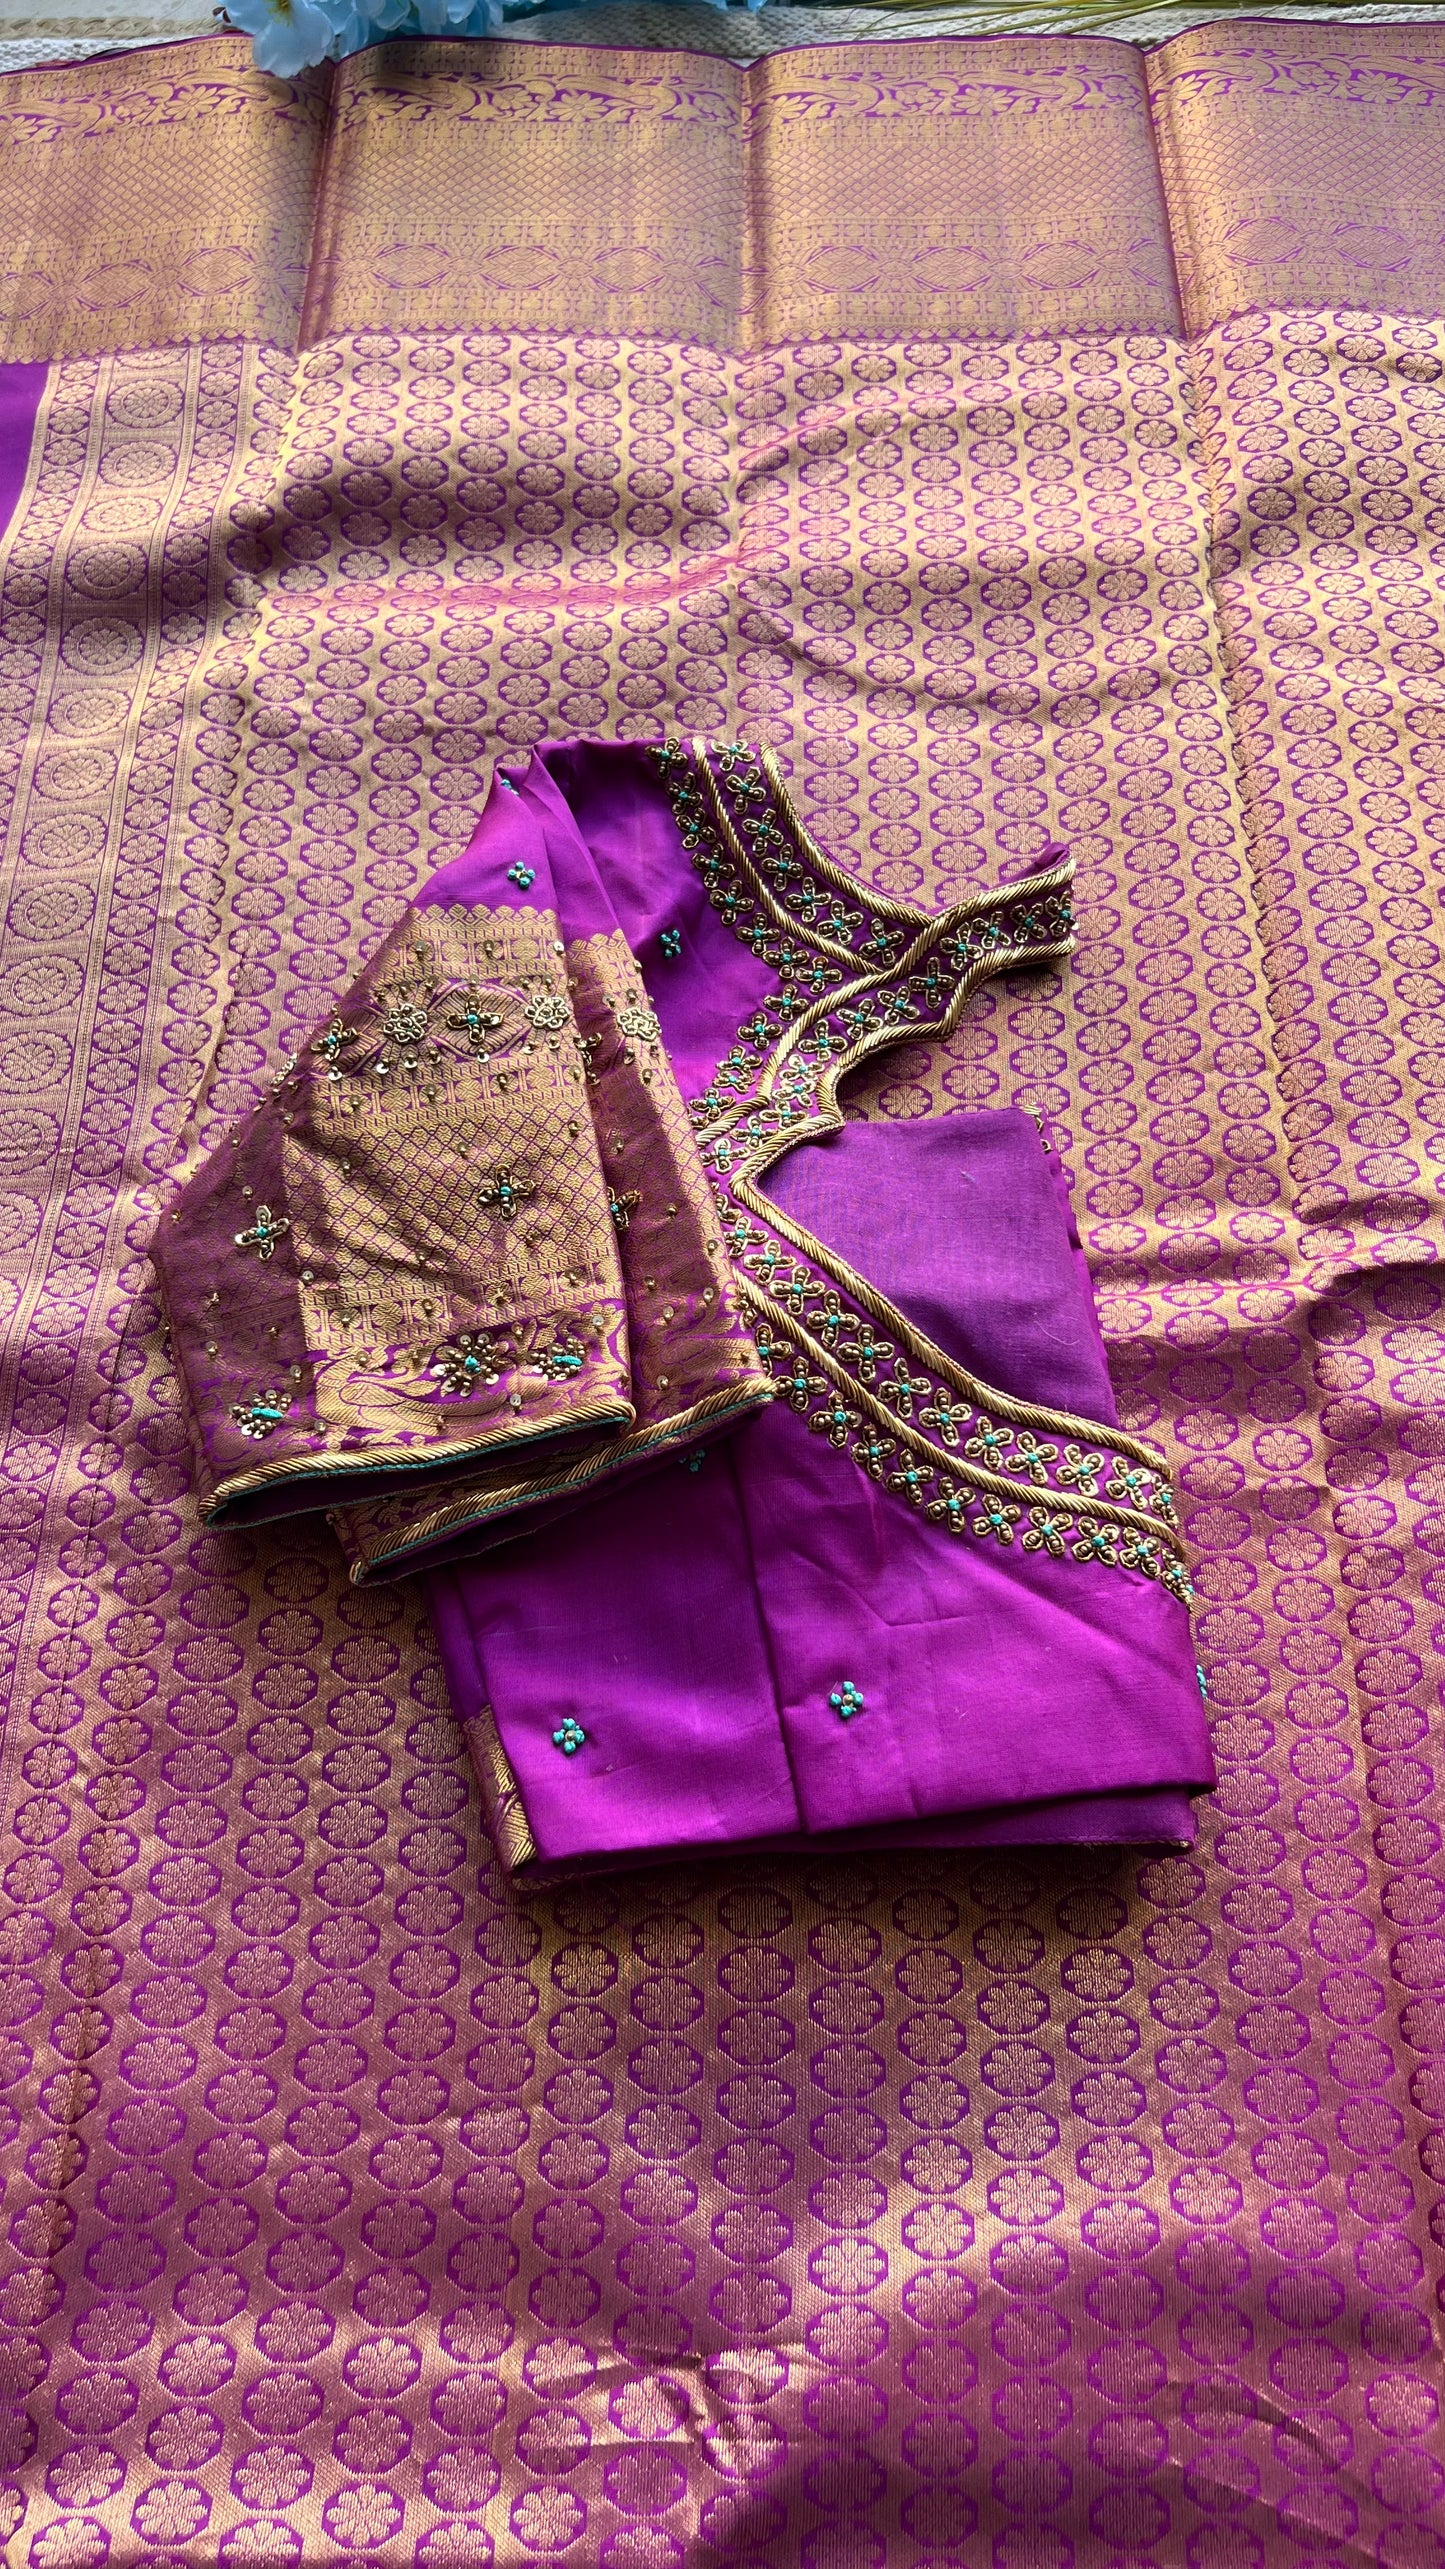 Sea blue and purple kanchipuram silk saree with hand worked blouse - Threads